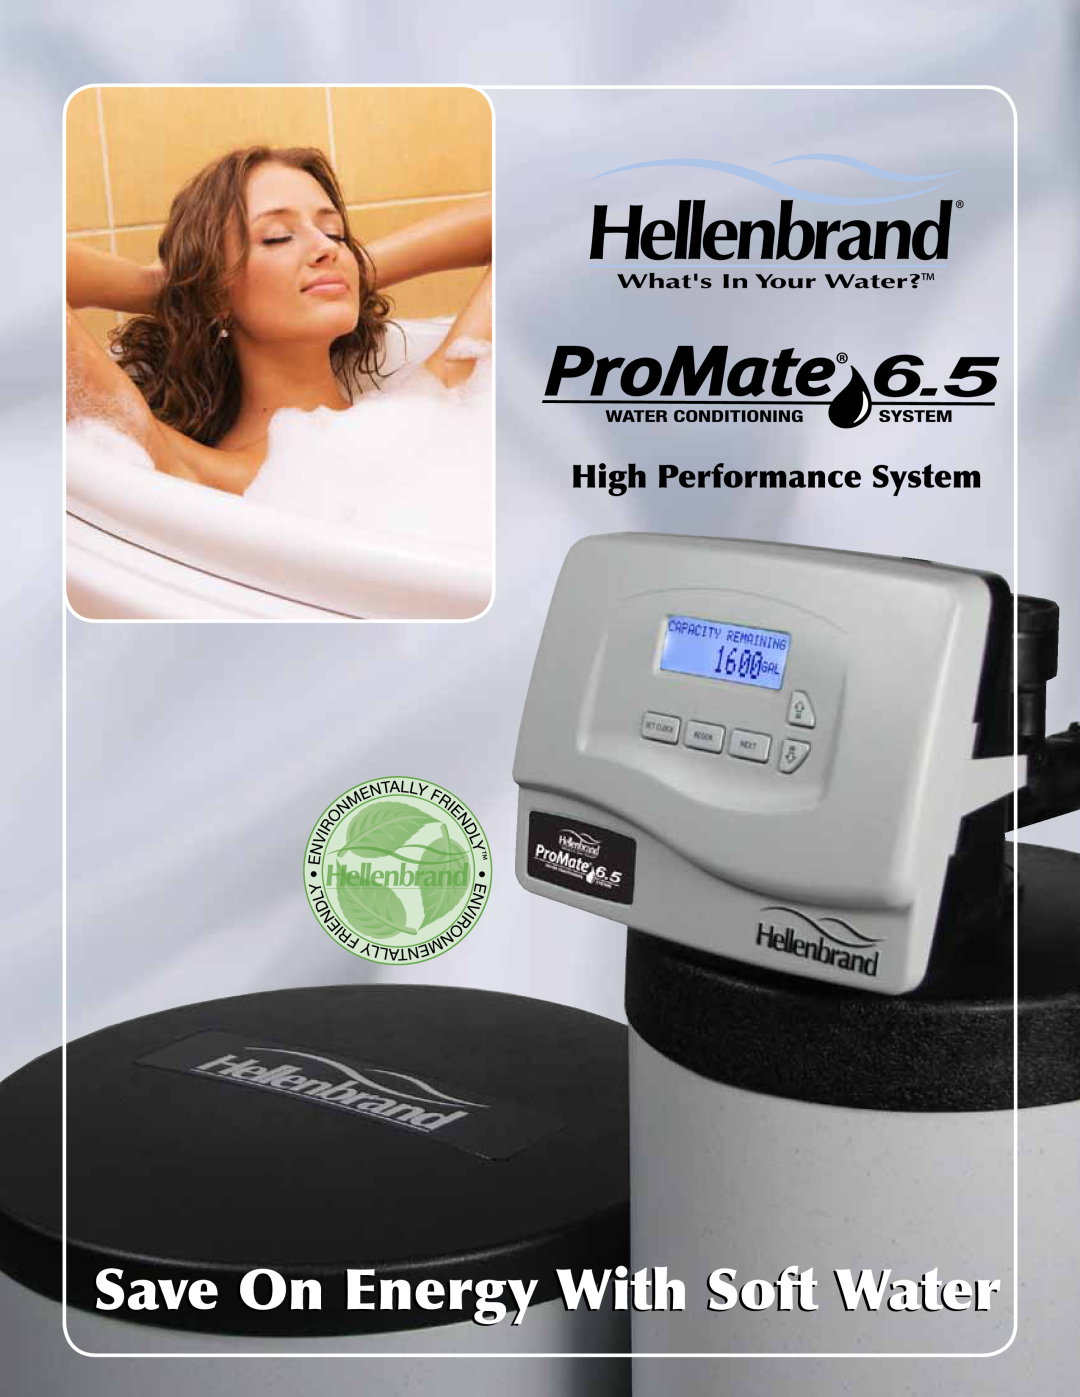 Hellenbrand 6.5 manual Save On Energy With Soft Water, High Performance System 